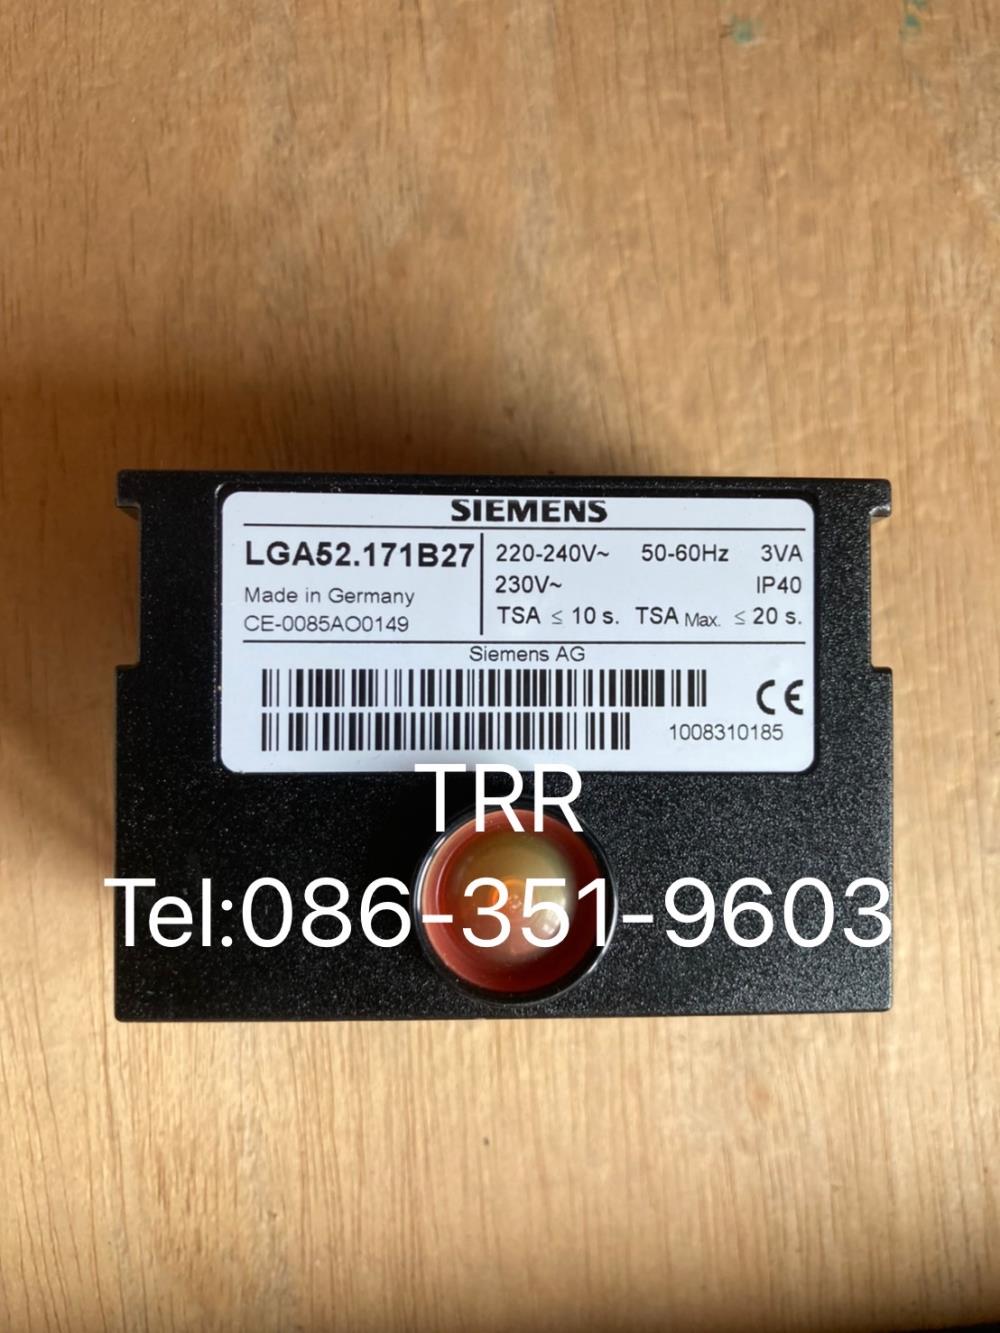 Siemens LGA52.171B27,Siemens LGA52.171B27,Siemens LGA52.171B27,Instruments and Controls/Controllers